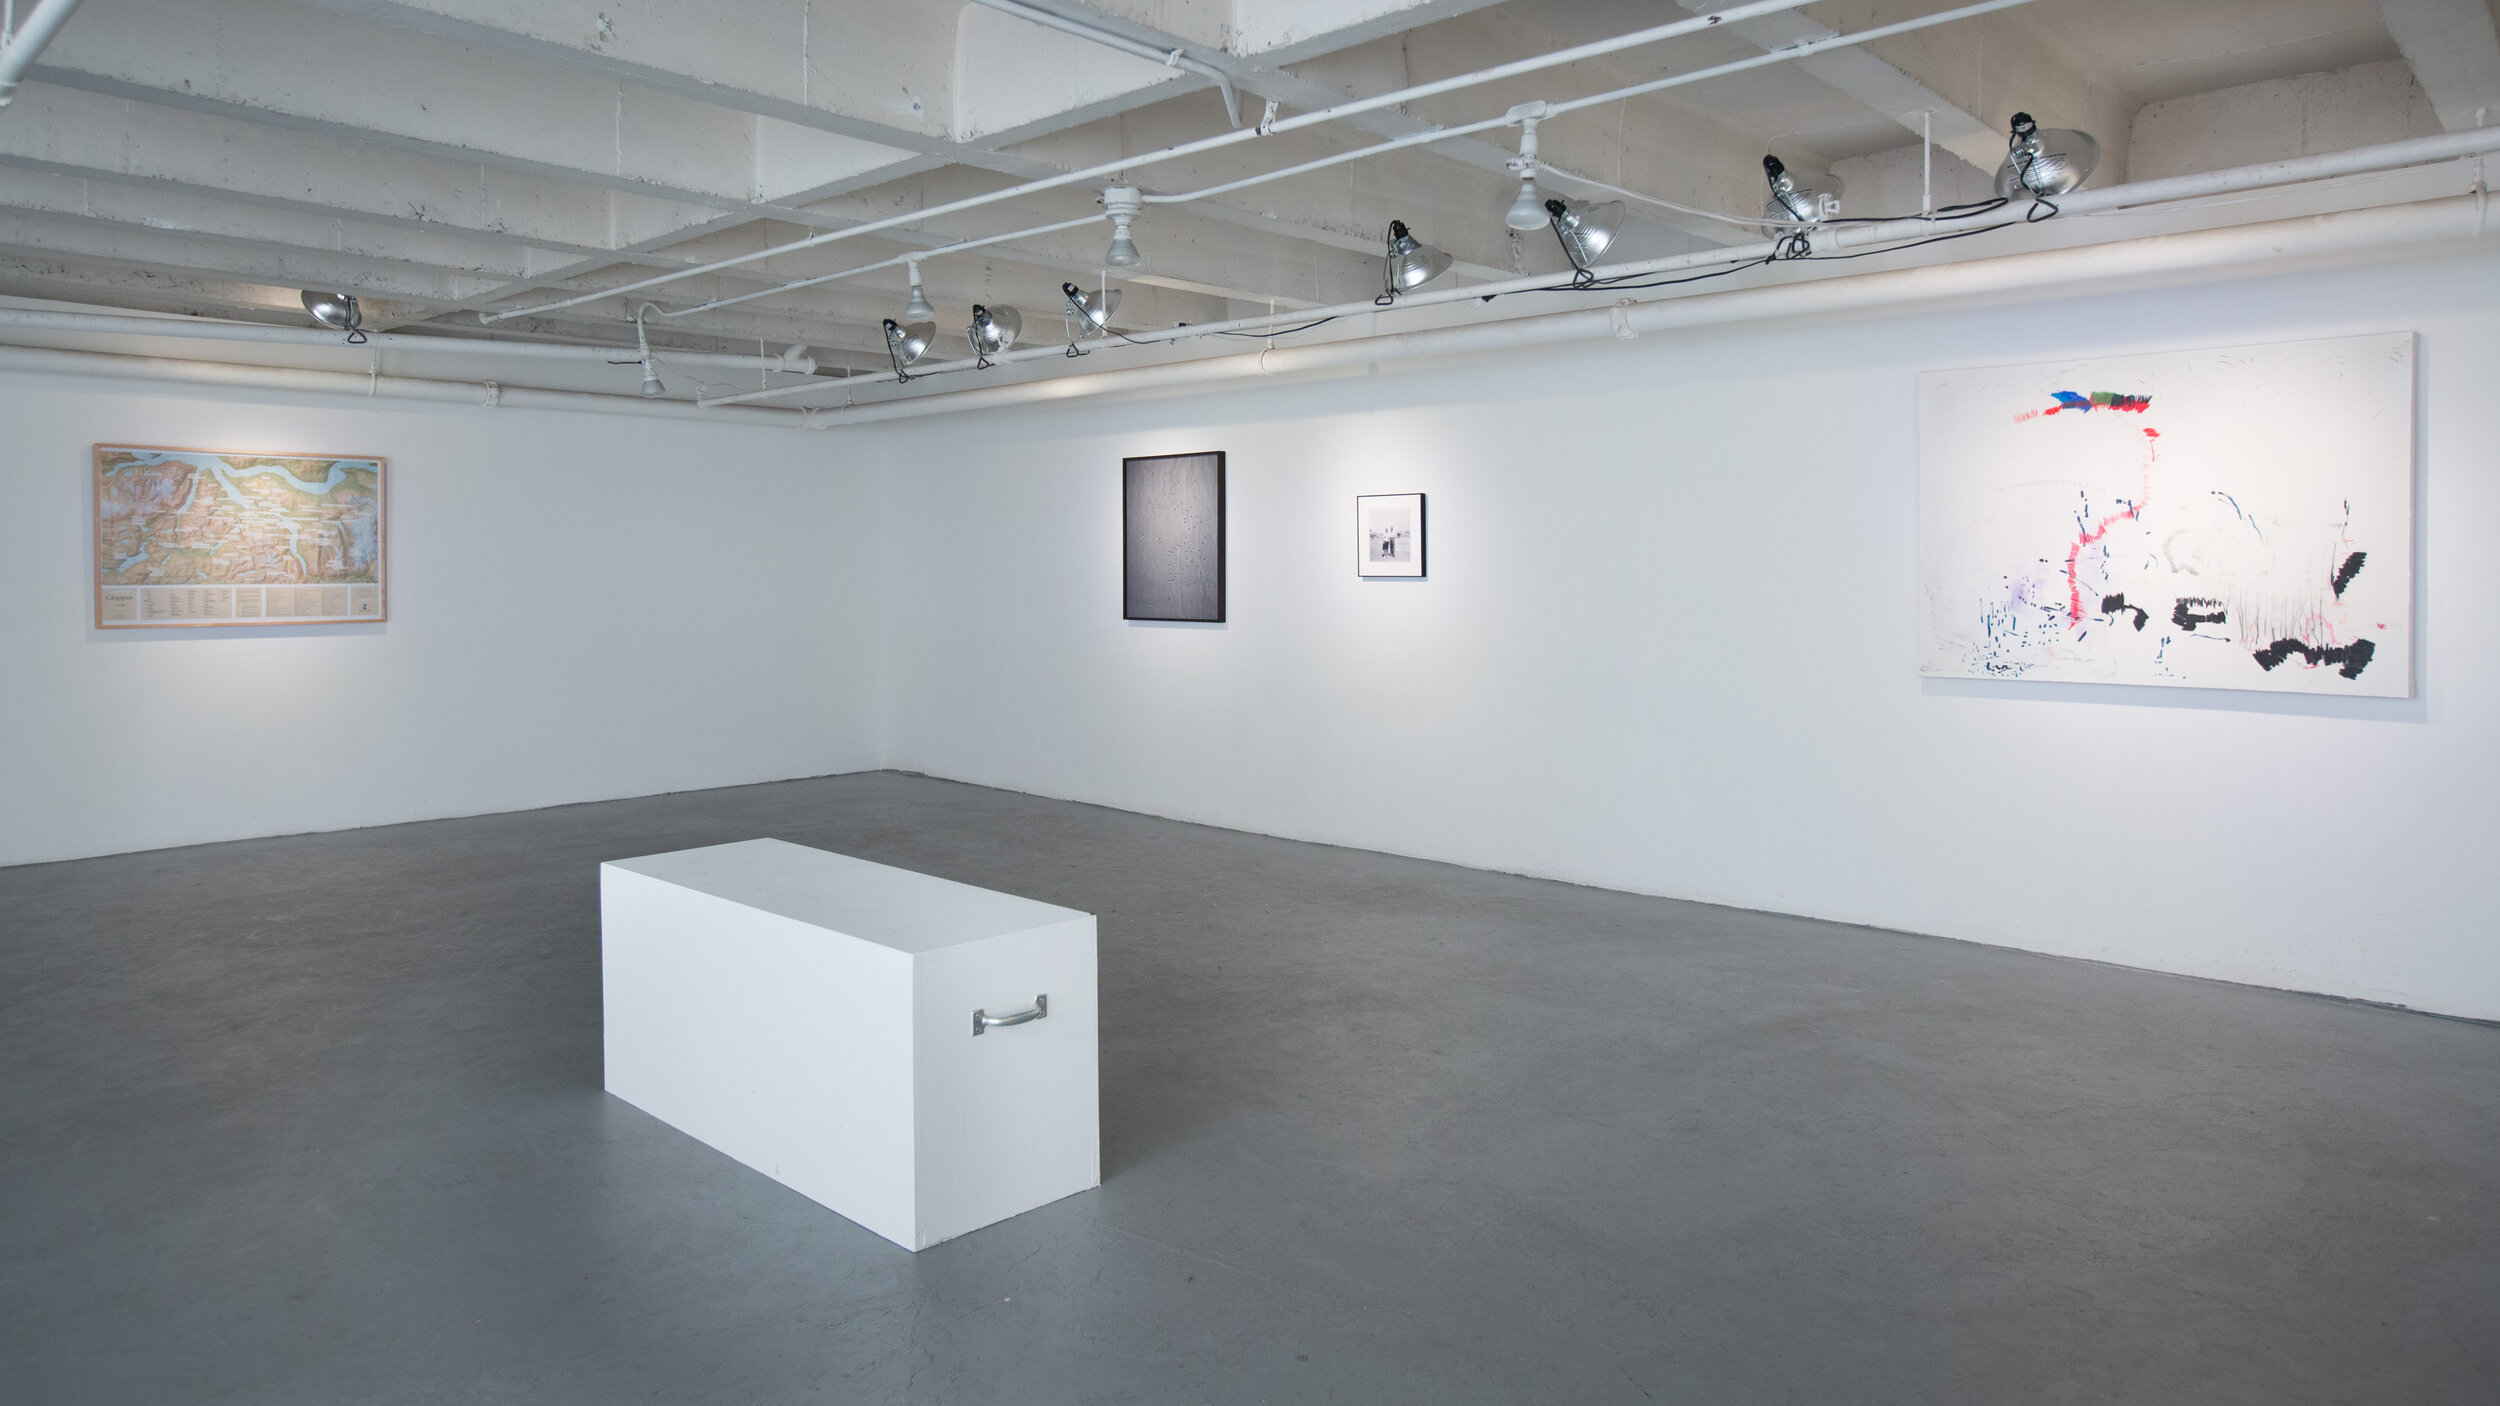   The Cartographer , curated by Alise Spinella, in installation at CJG, July 2014. 